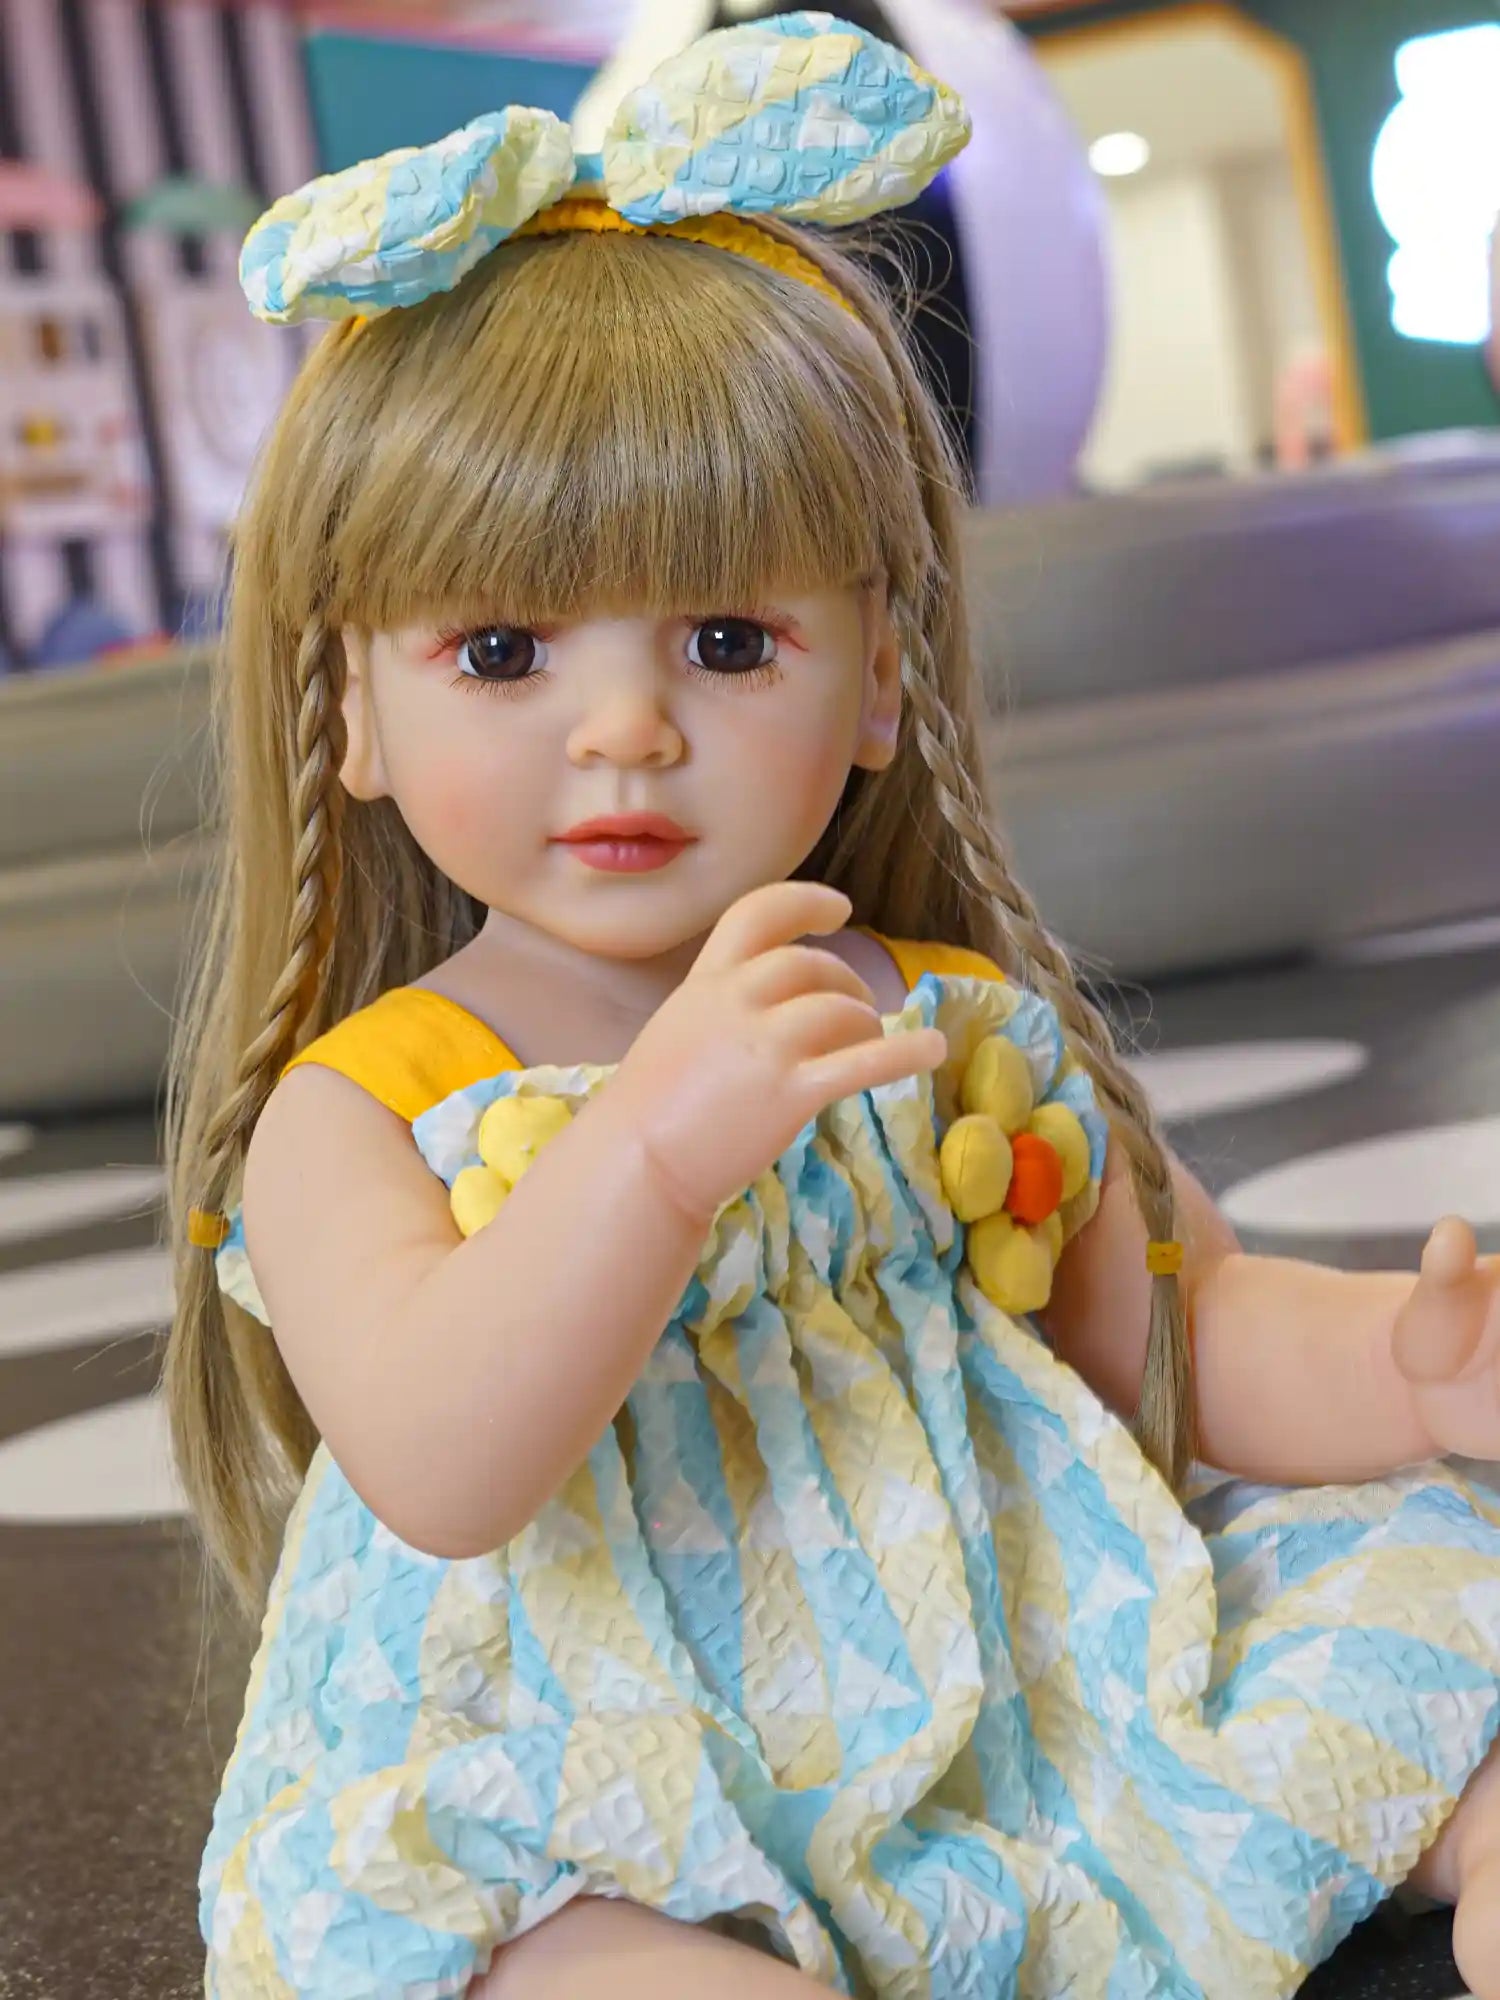 Lifelike blonde doll sitting in a blue and yellow dress with floral accents.